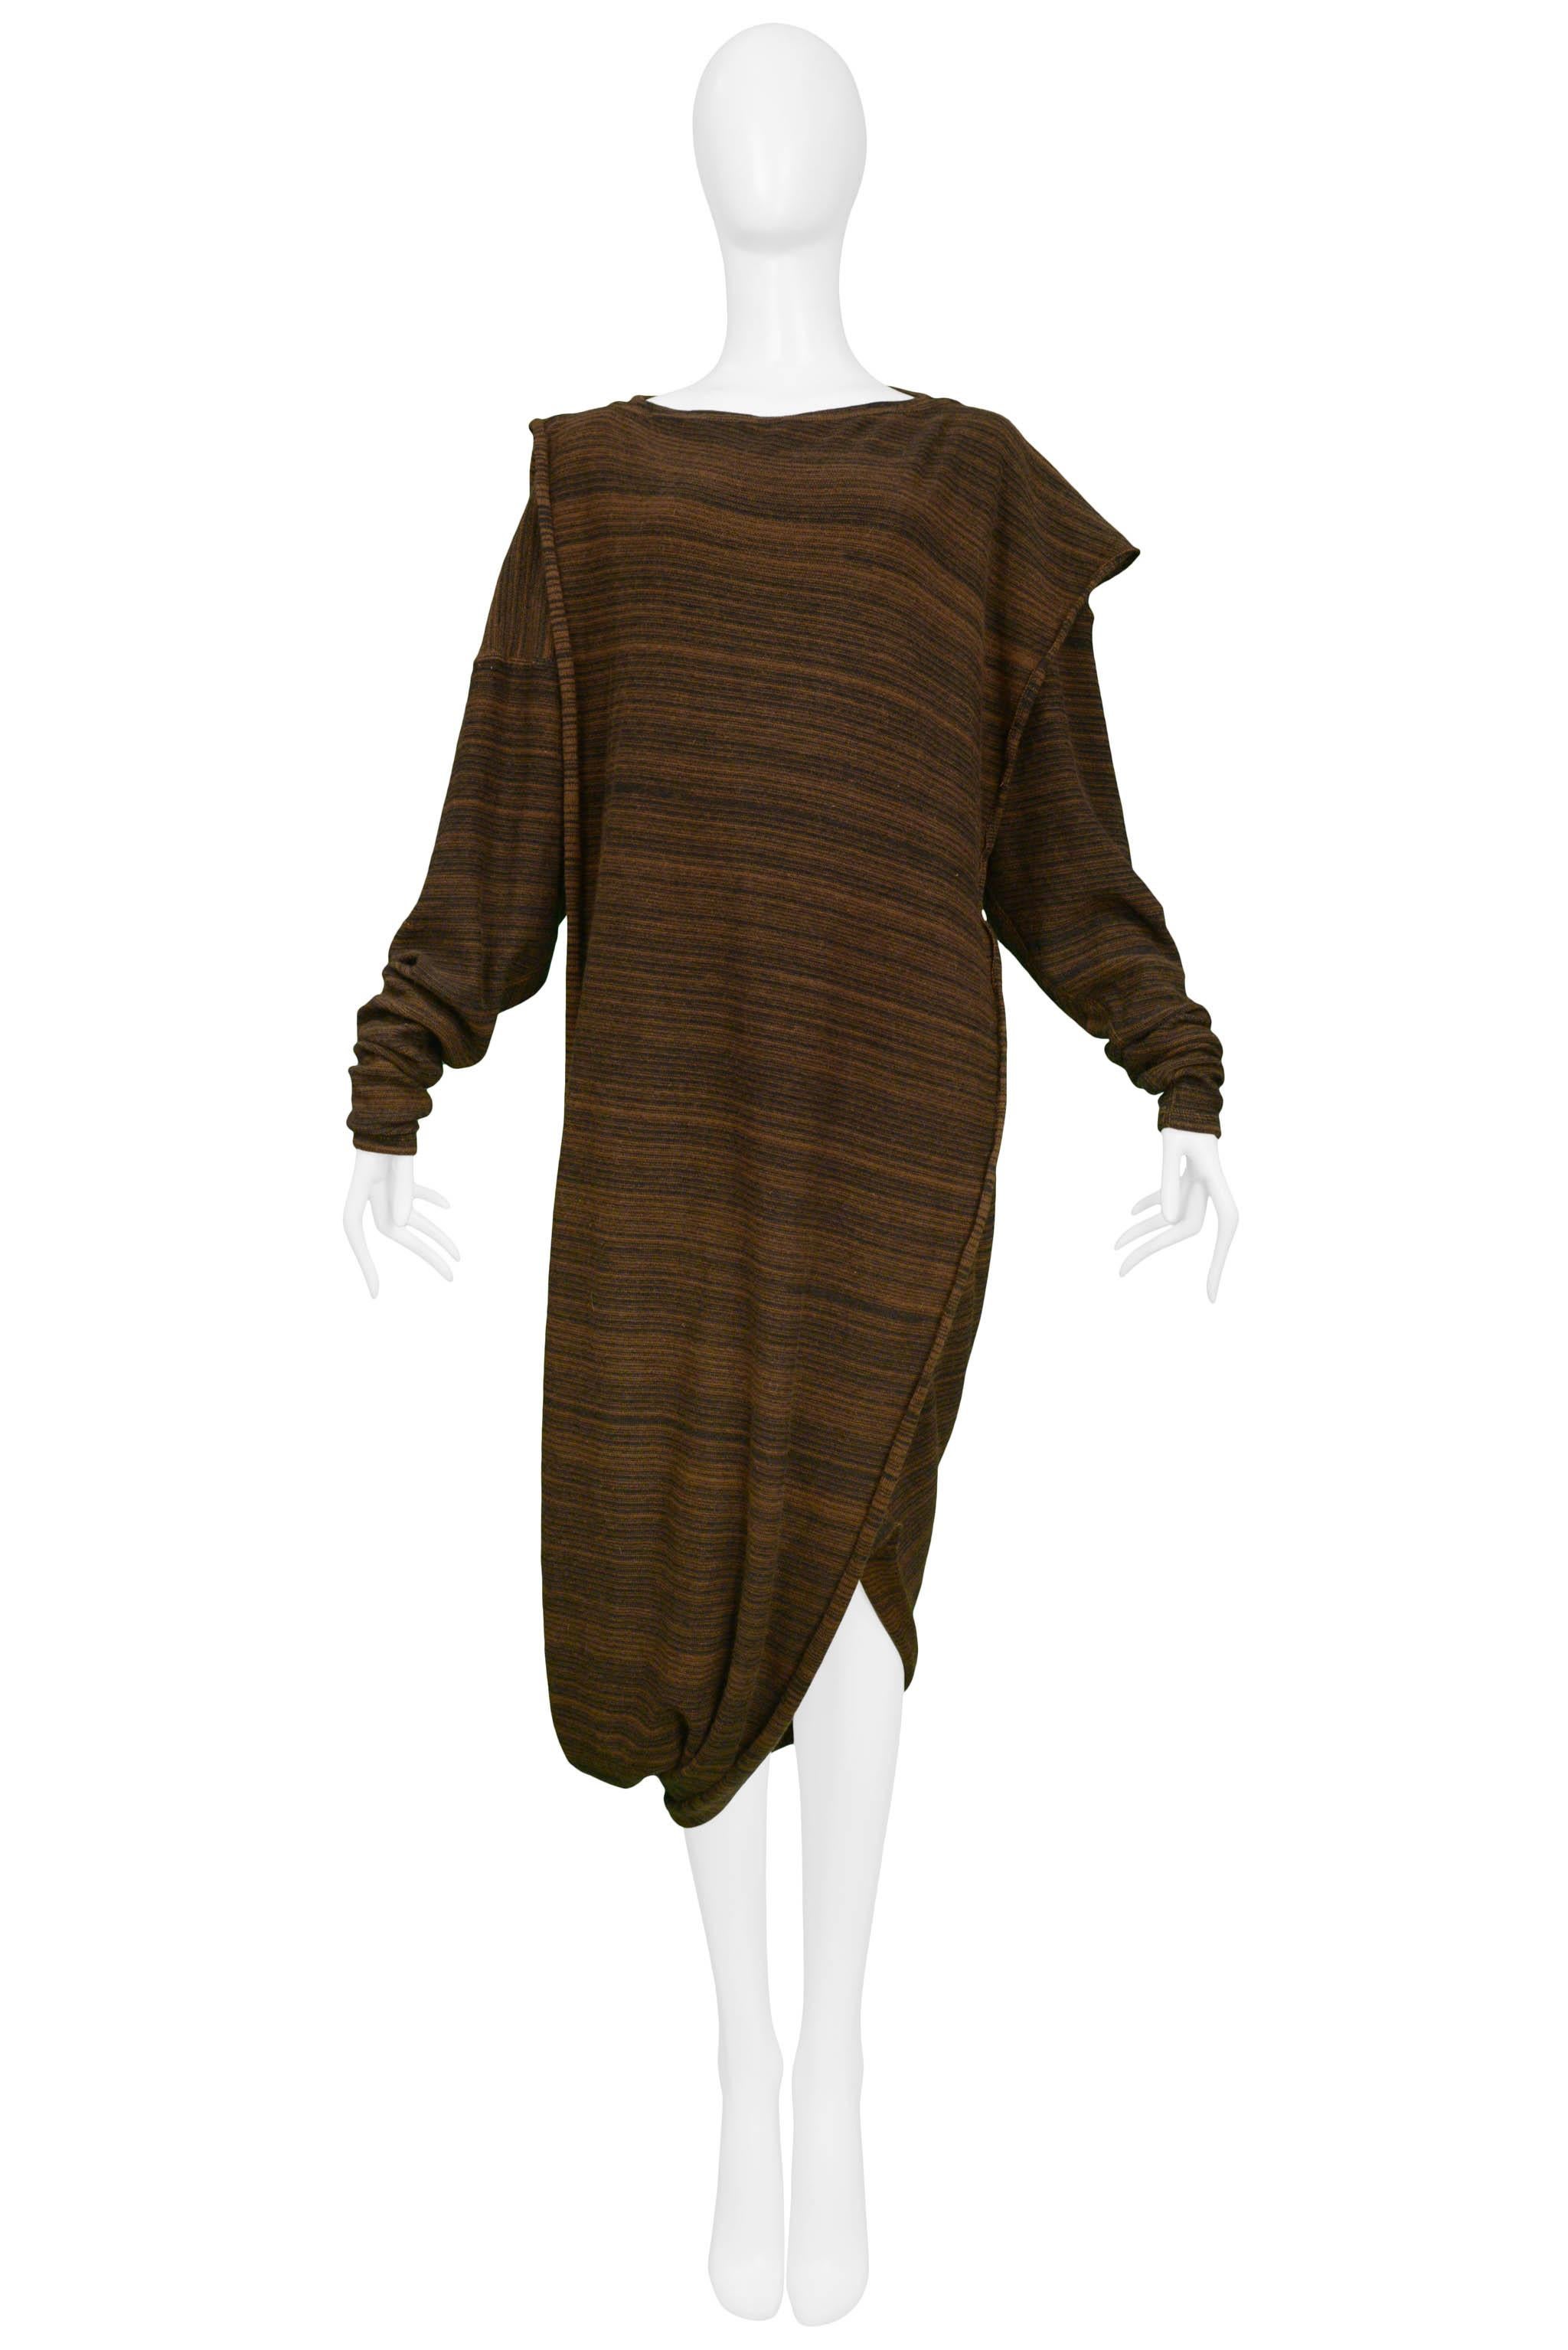 Resurrection Vintage is excited to offer a vintage 1970's Issey Miyake dark and medium brown knit toga dress with an attached over-piece, long sleeves, and 3/4 length body. 

Issey Miyake
Size S/M
Measurements: Shoulder 17